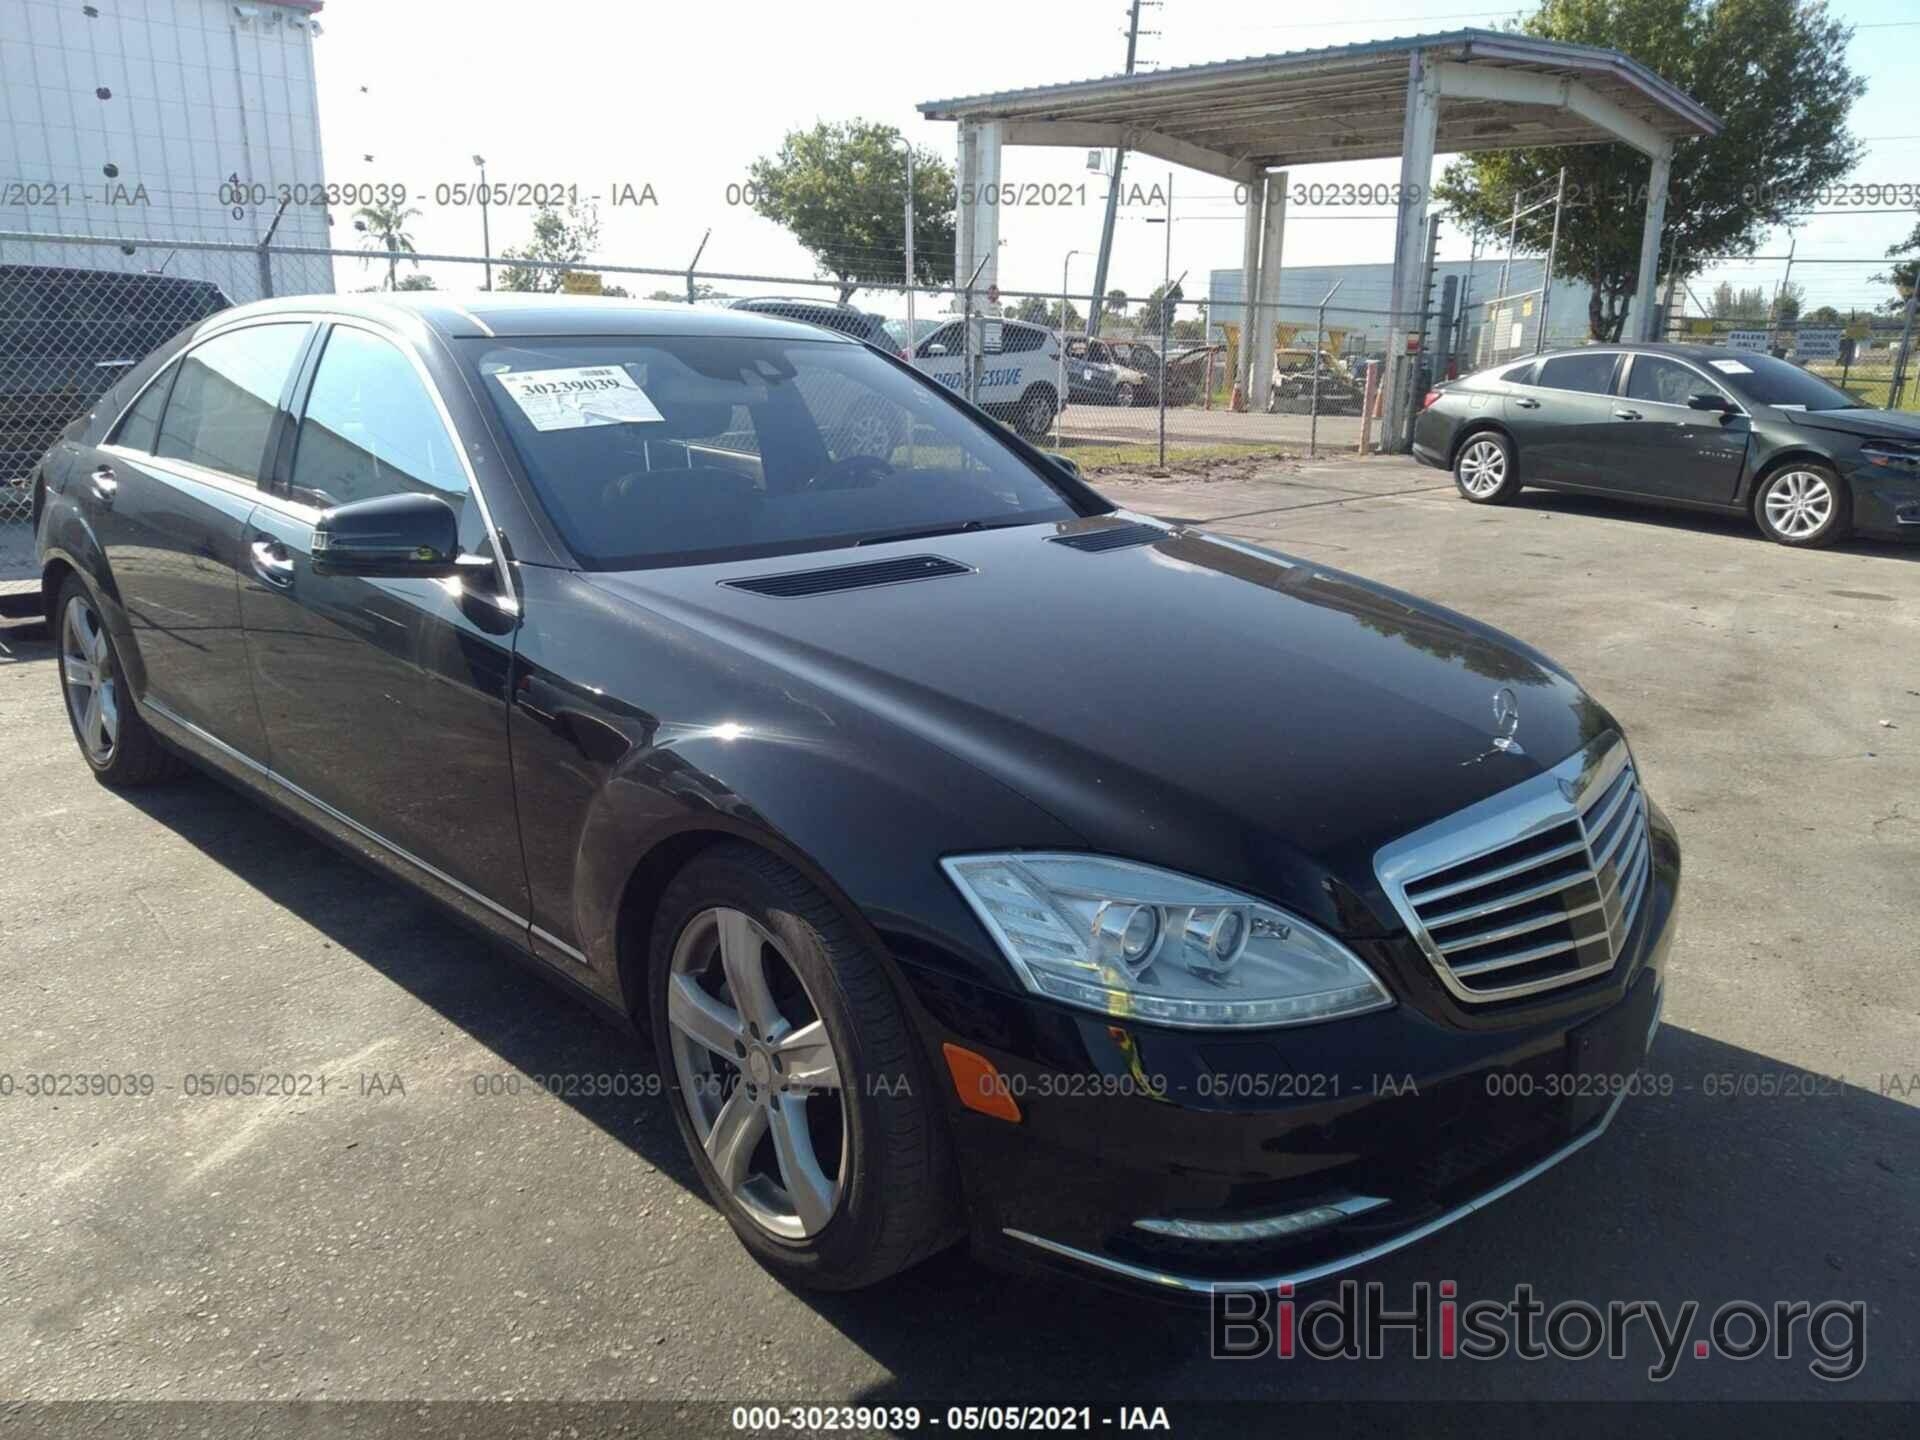 Photo WDDNG8GB7AA315483 - MERCEDES-BENZ S-CLASS 2010